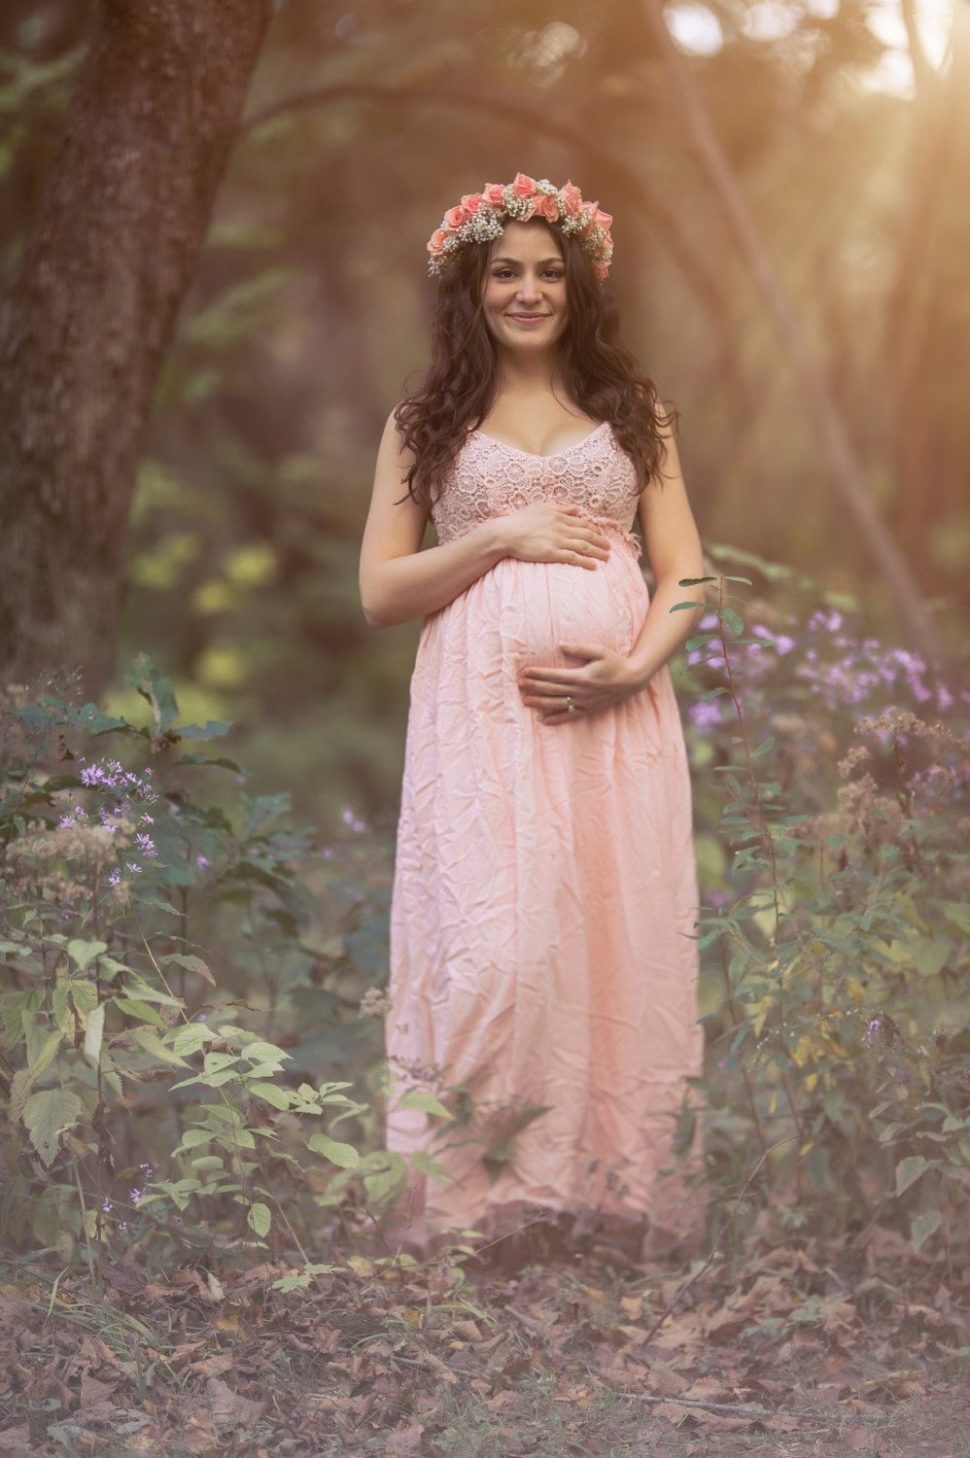 Medium Size of Baby Shower:maternity Boutique Cute Maternity Dresses For Baby Shower Affordable Maternity Dresses For Baby Shower What To Wear To My Baby Shower Baby Shower Dresses For Fall Plus Size Maternity Clothes Baby Shower Attire For Mom Maternity Gowns For Photography